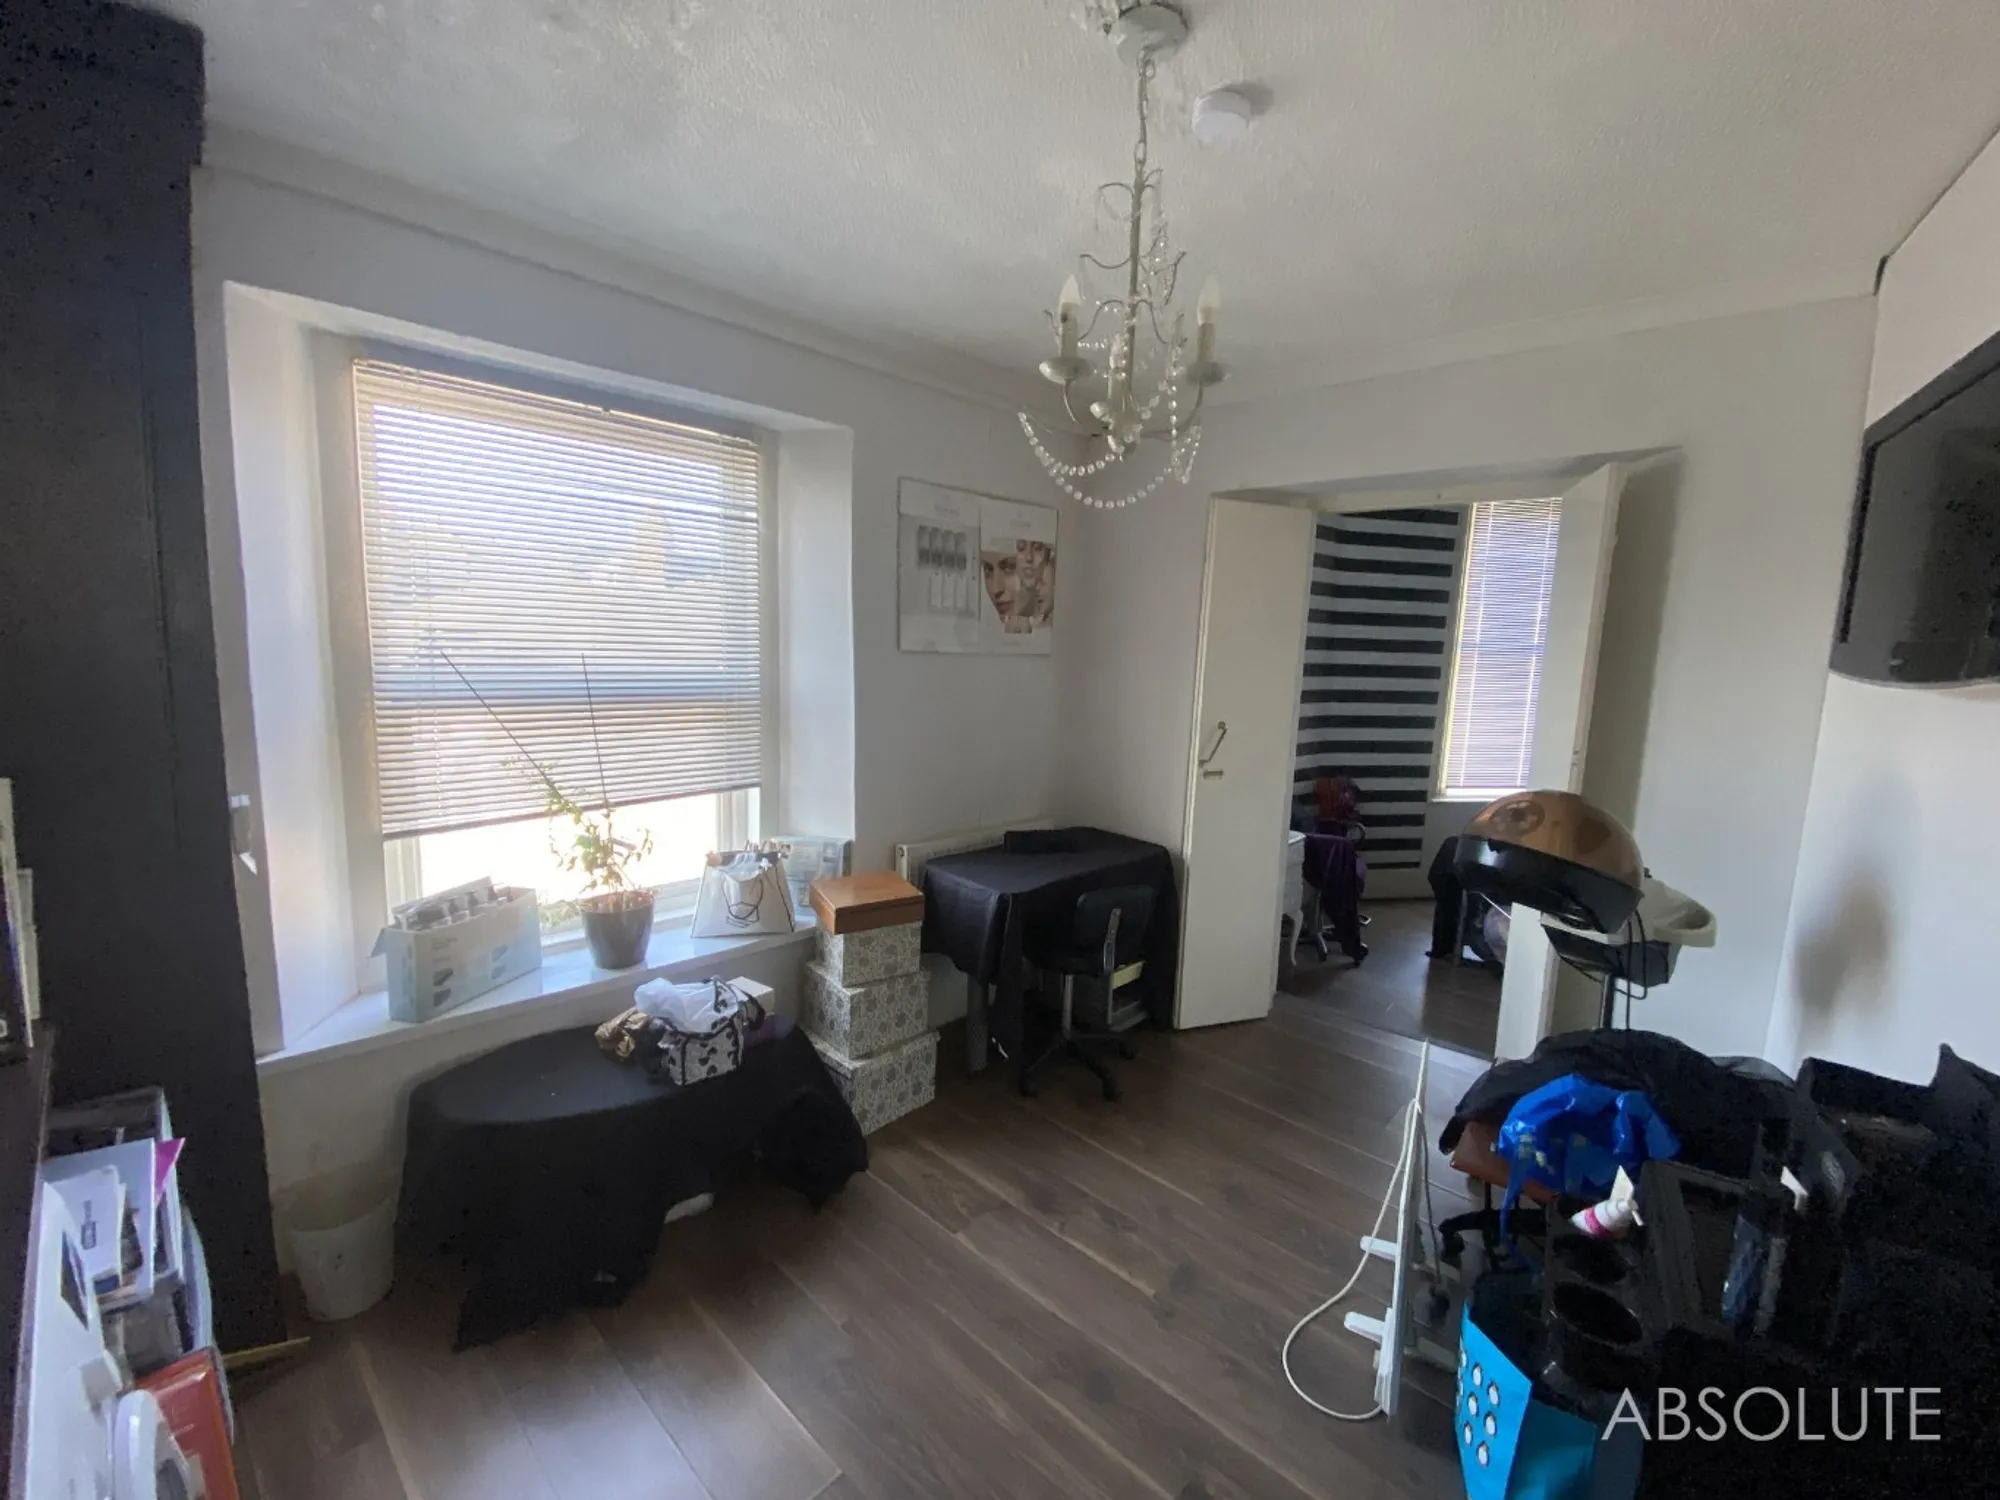 For sale in Victoria Road, Torquay  - Property Image 2